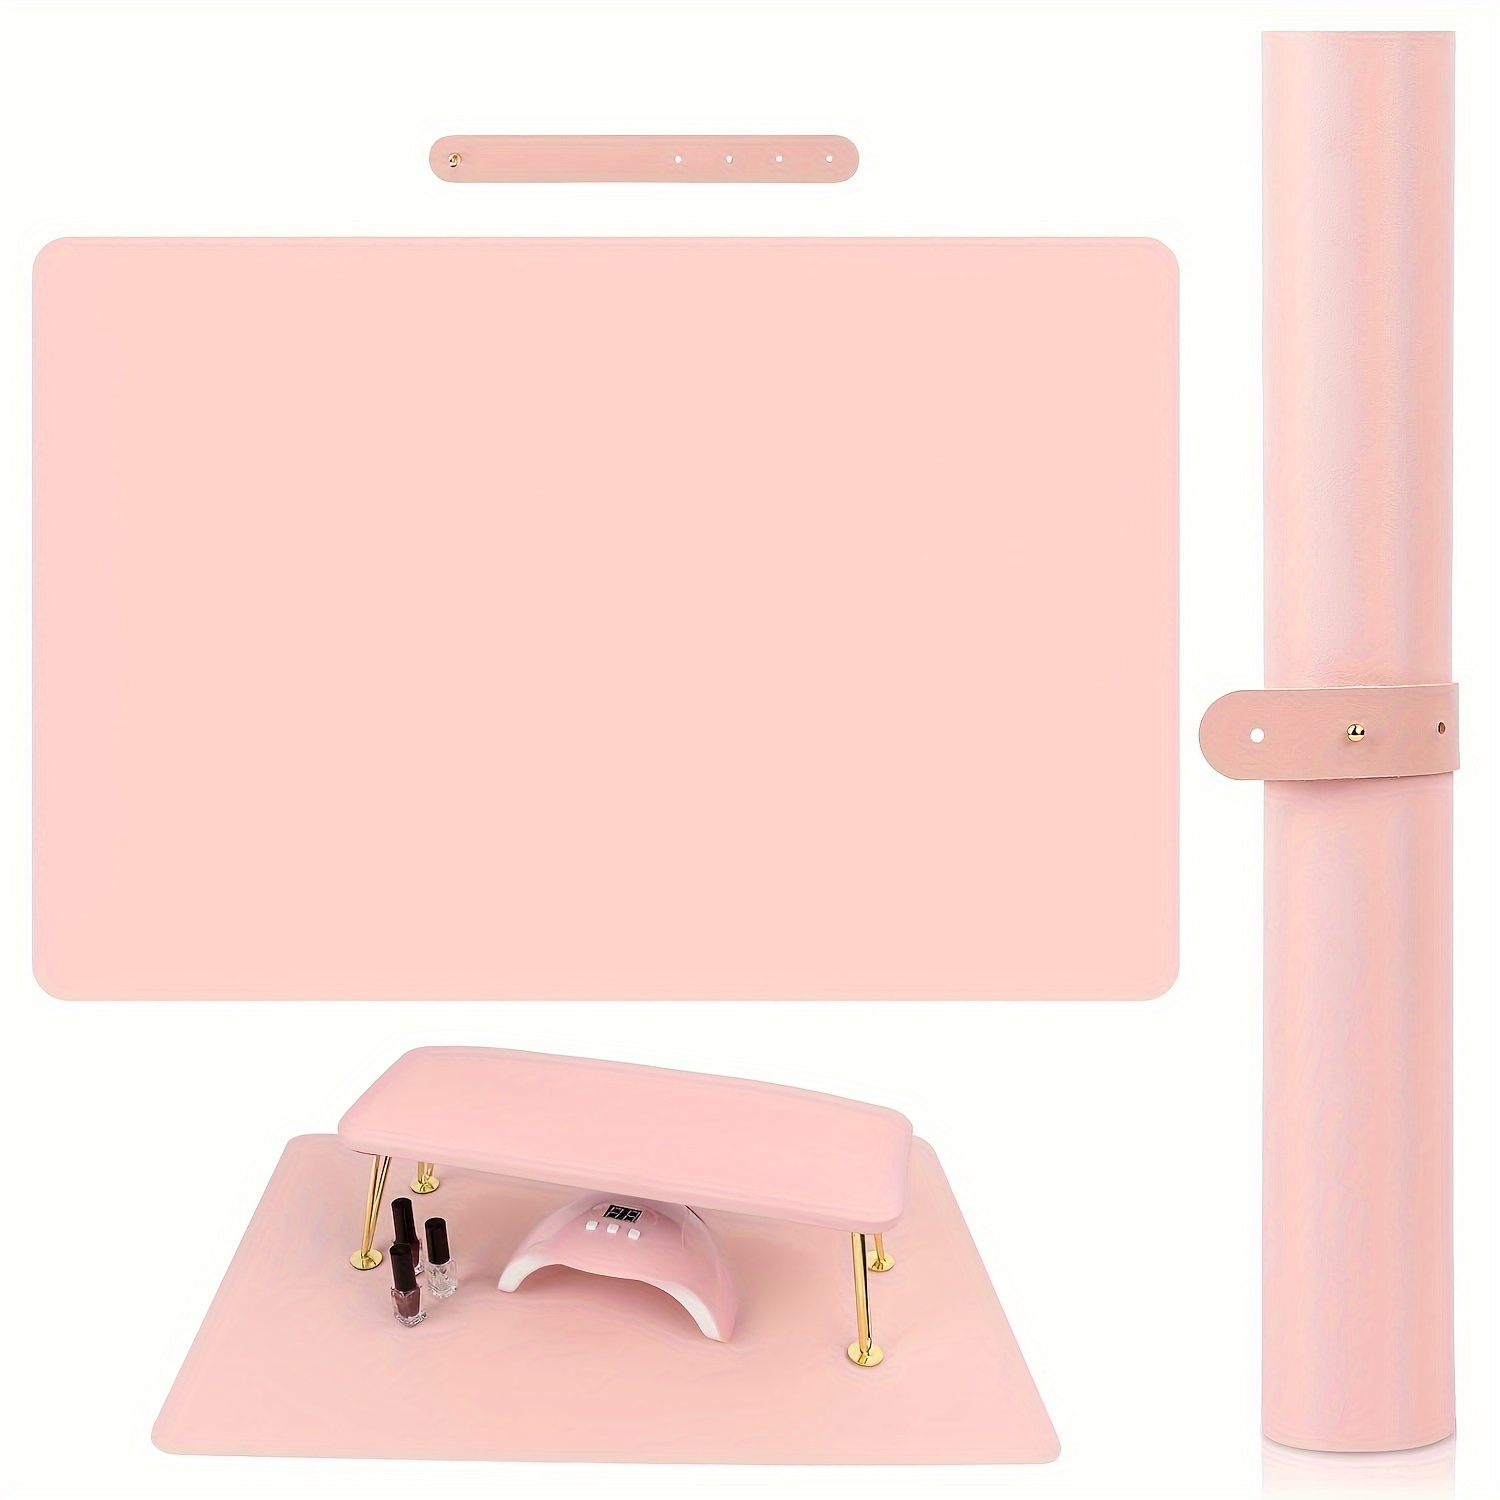 

Foldable Pink Nail Art Table Mat, Soft Microfiber Pu Leather, Waterproof Scratch & Dirt Resistant, Manicure Hand Rest Cushion Pad For Nail Technician, Mat – Ideal For Nail Salon Use